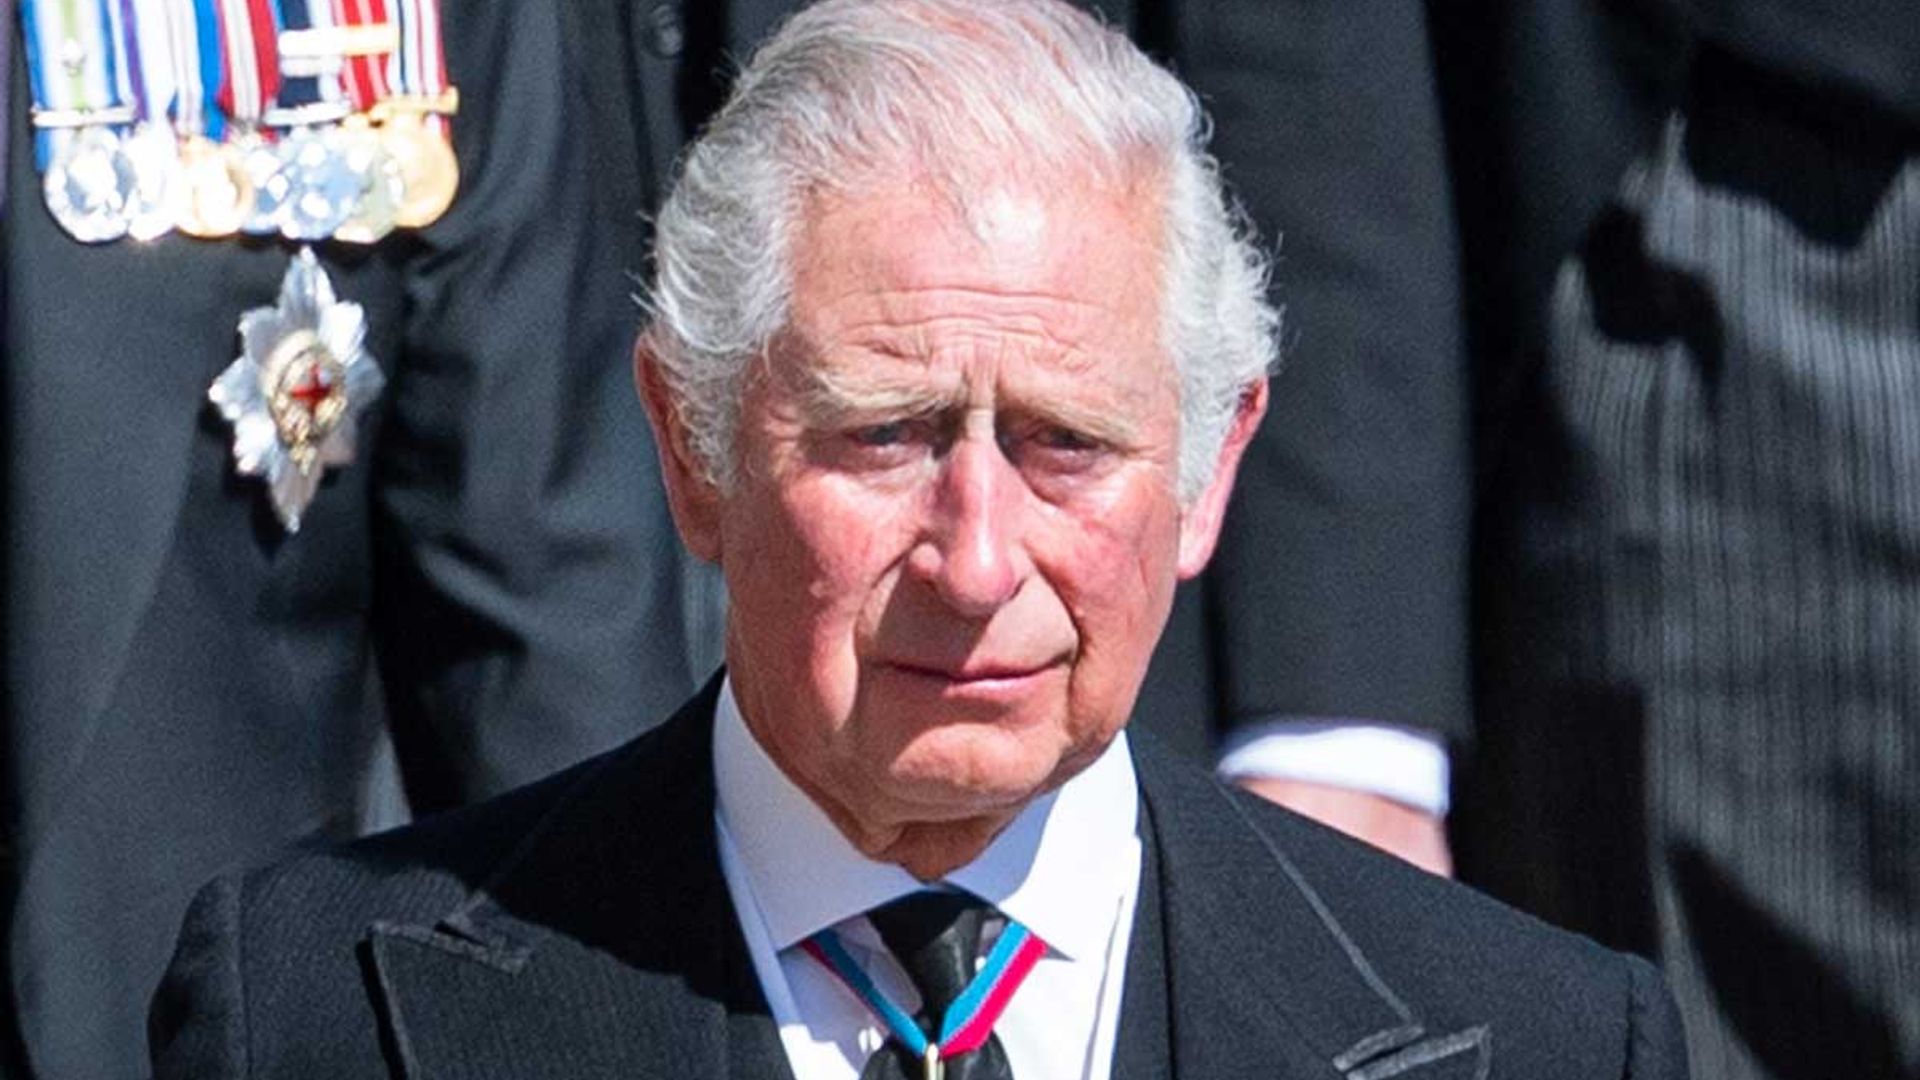 Prince Charles makes private donation after expressing deep sadness over tragedy in India